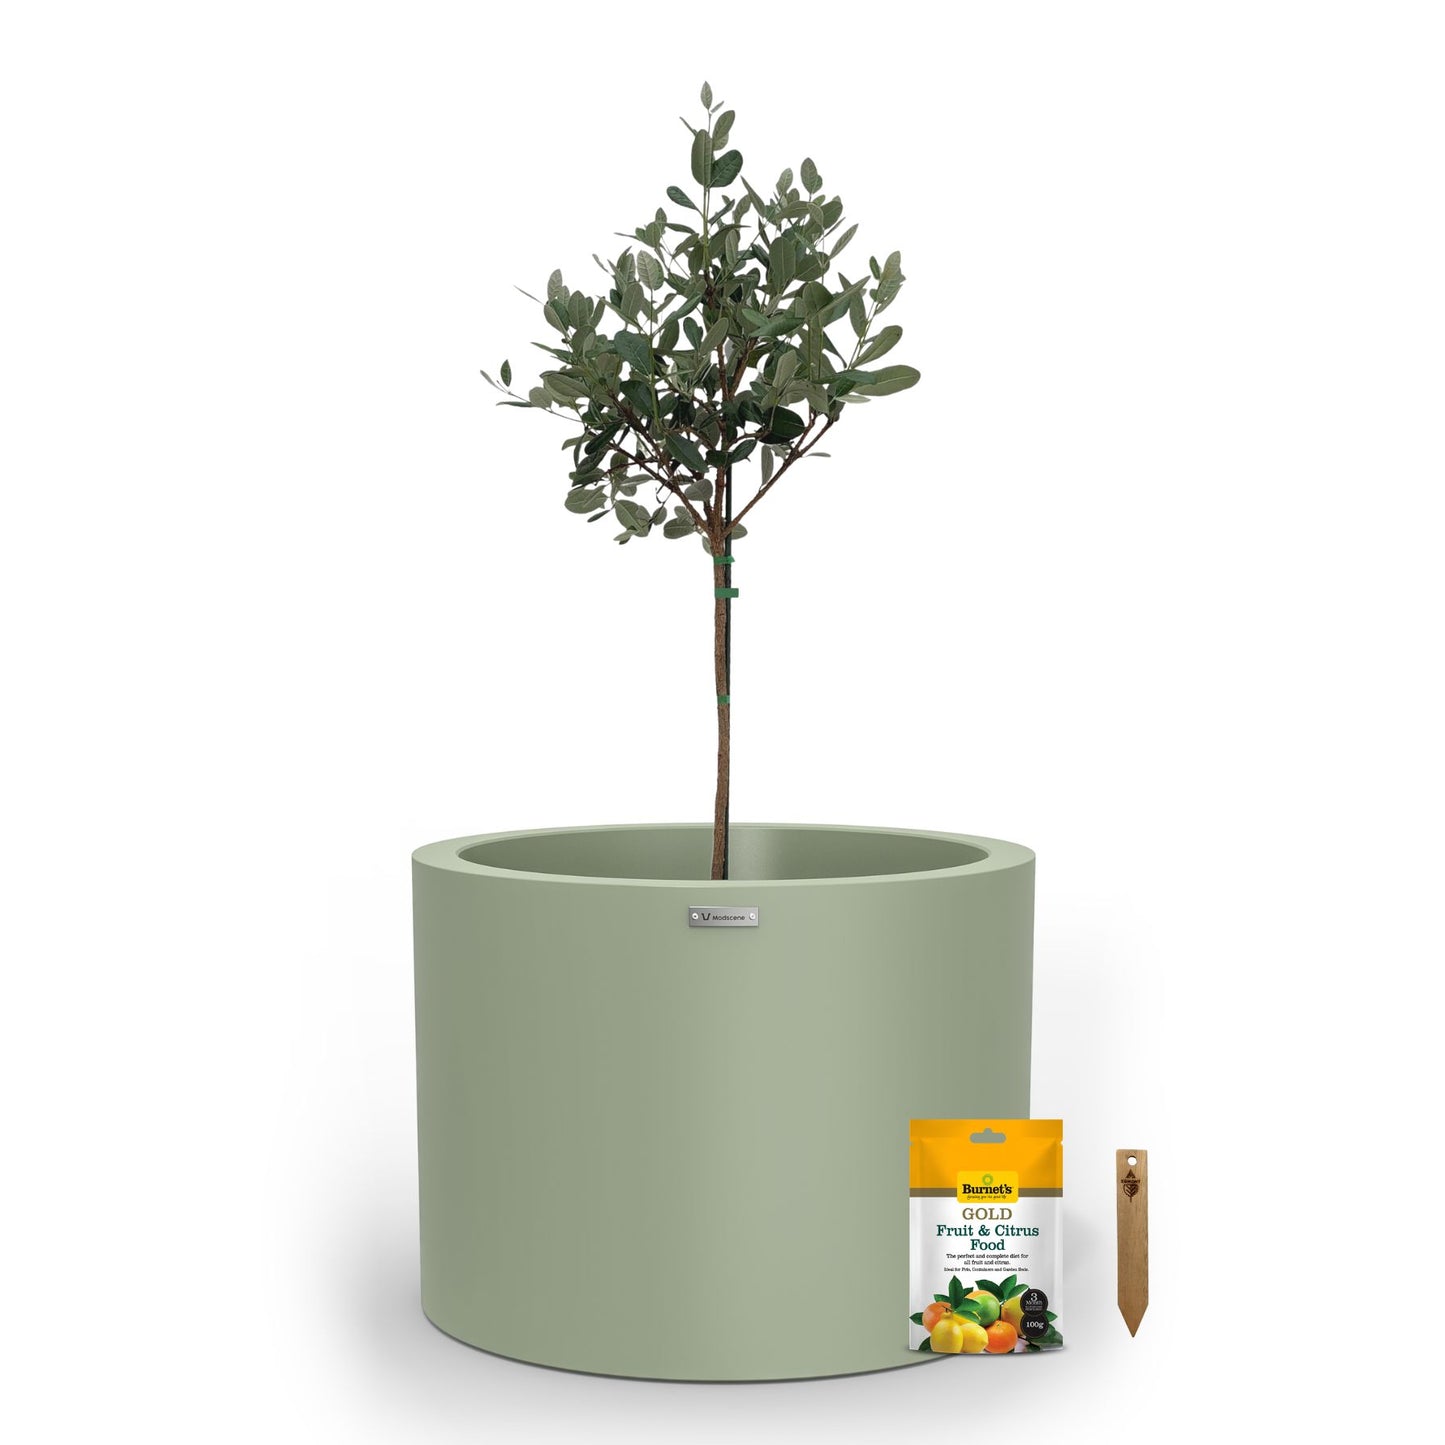 A large soft green planter pot used to plant fruit trees. 